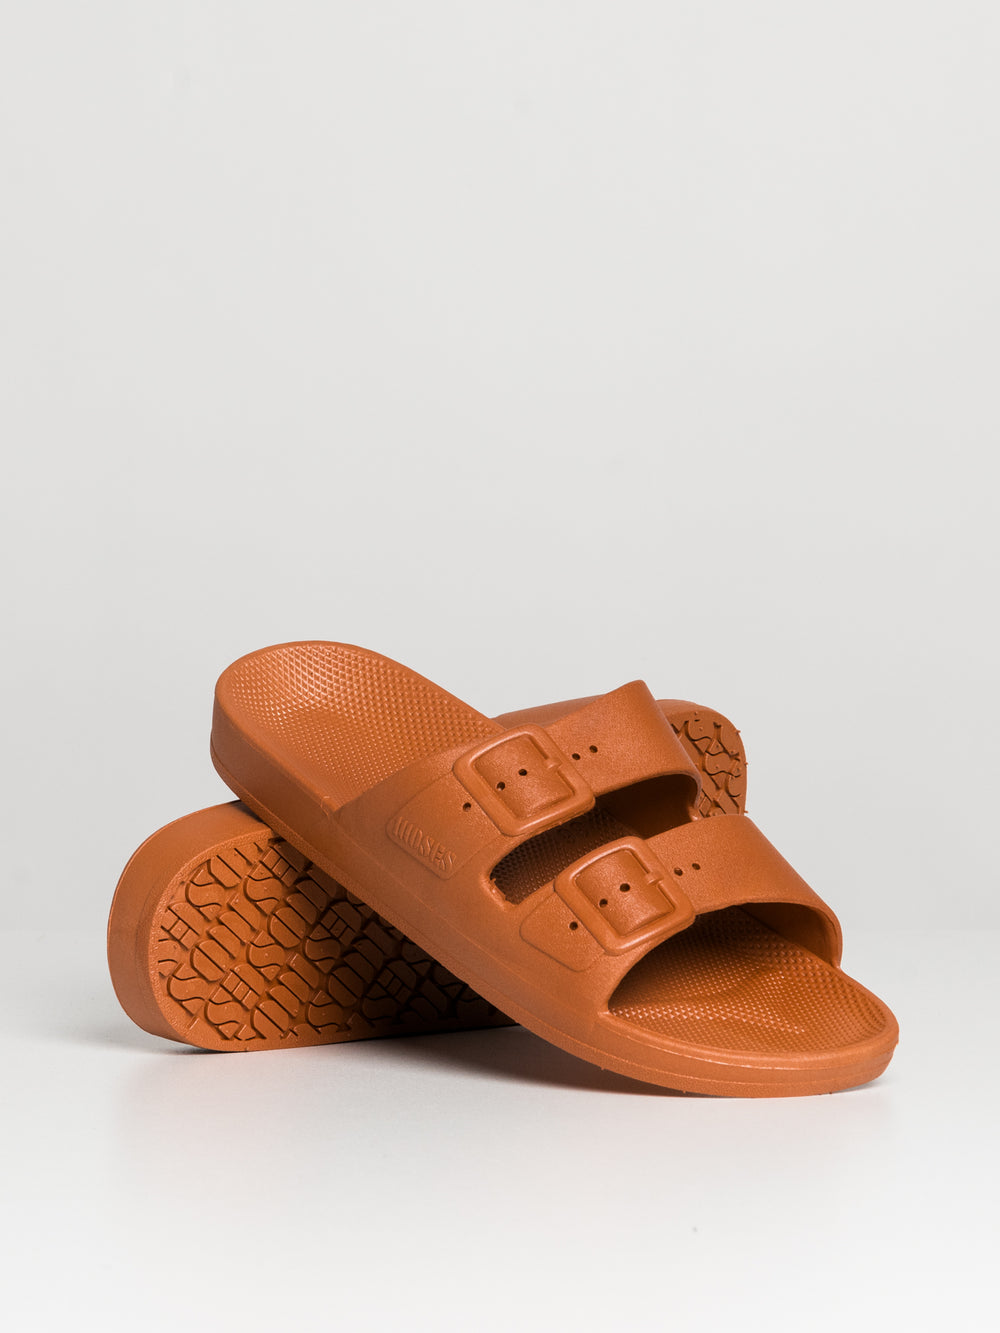 WOMENS FREEDOM MOSES FREEDOM TOFFEE SANDAL - CLEARANCE